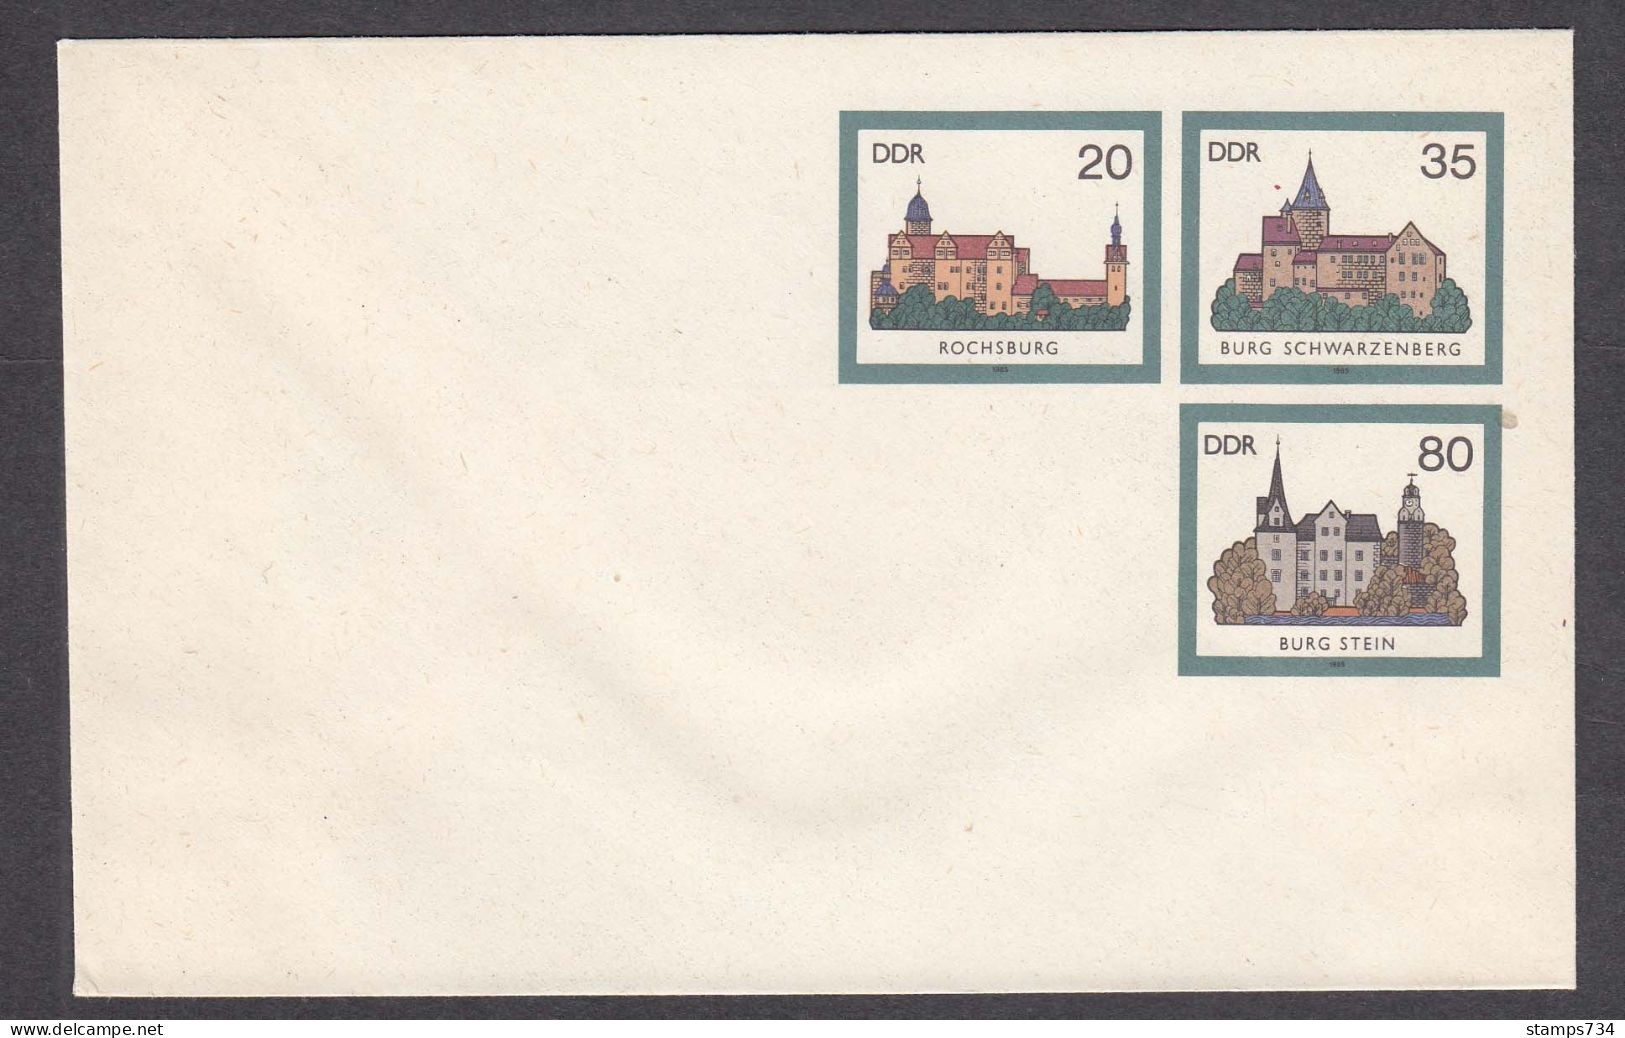 DDR 09/1985 - Castles, Post. Stationery (cover), Mint - Covers - Mint